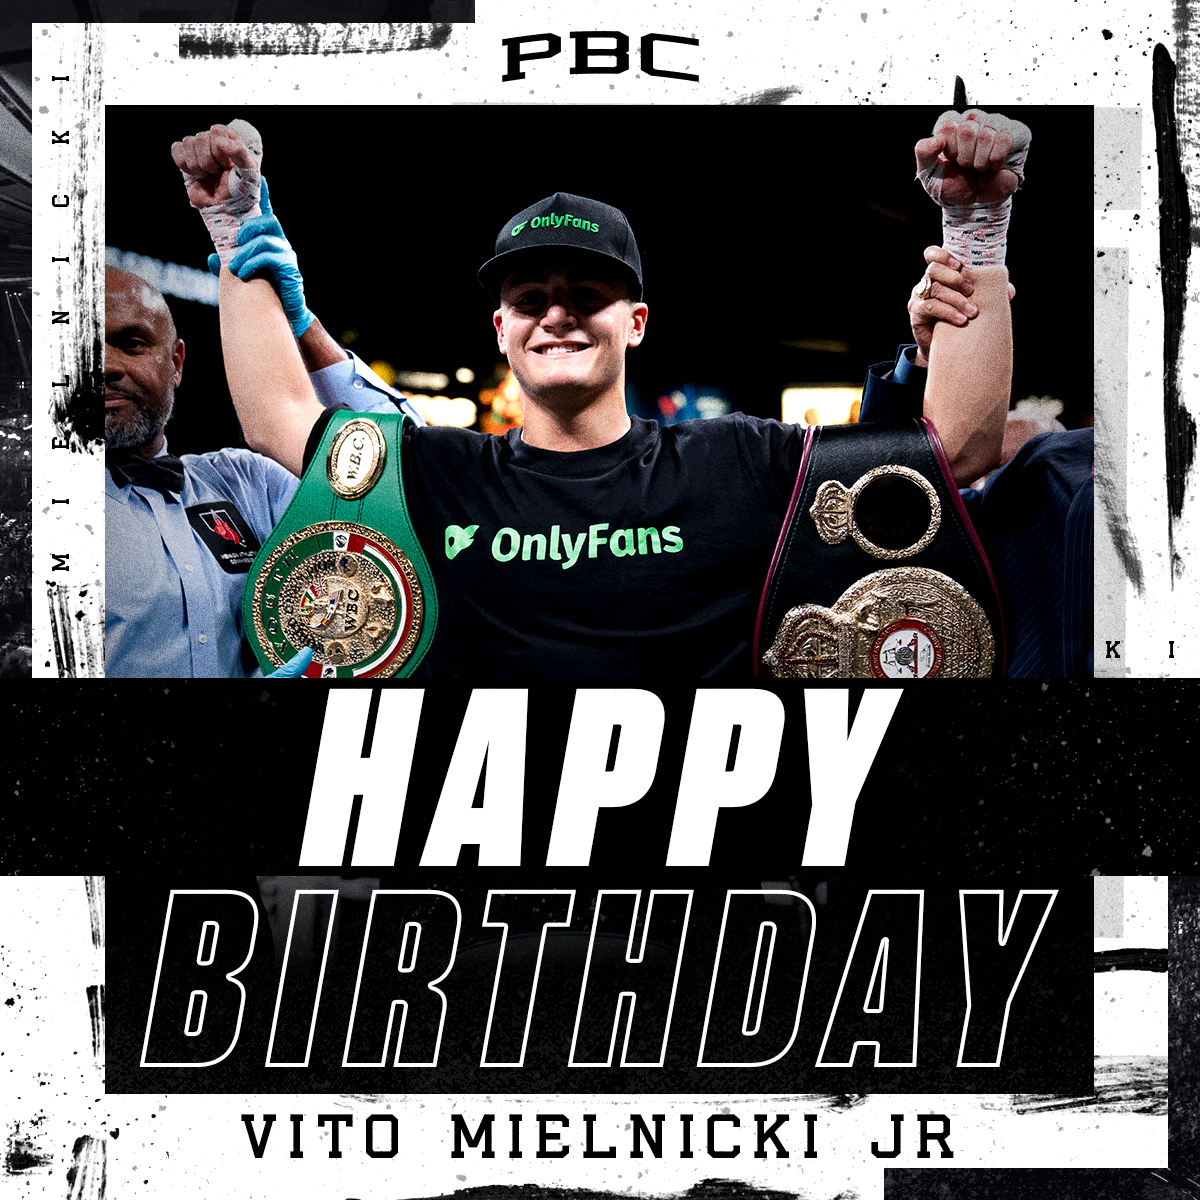 Join us in wishing rising super welterweight @VitoMielnickiJr a HAPPY BIRTHDAY!